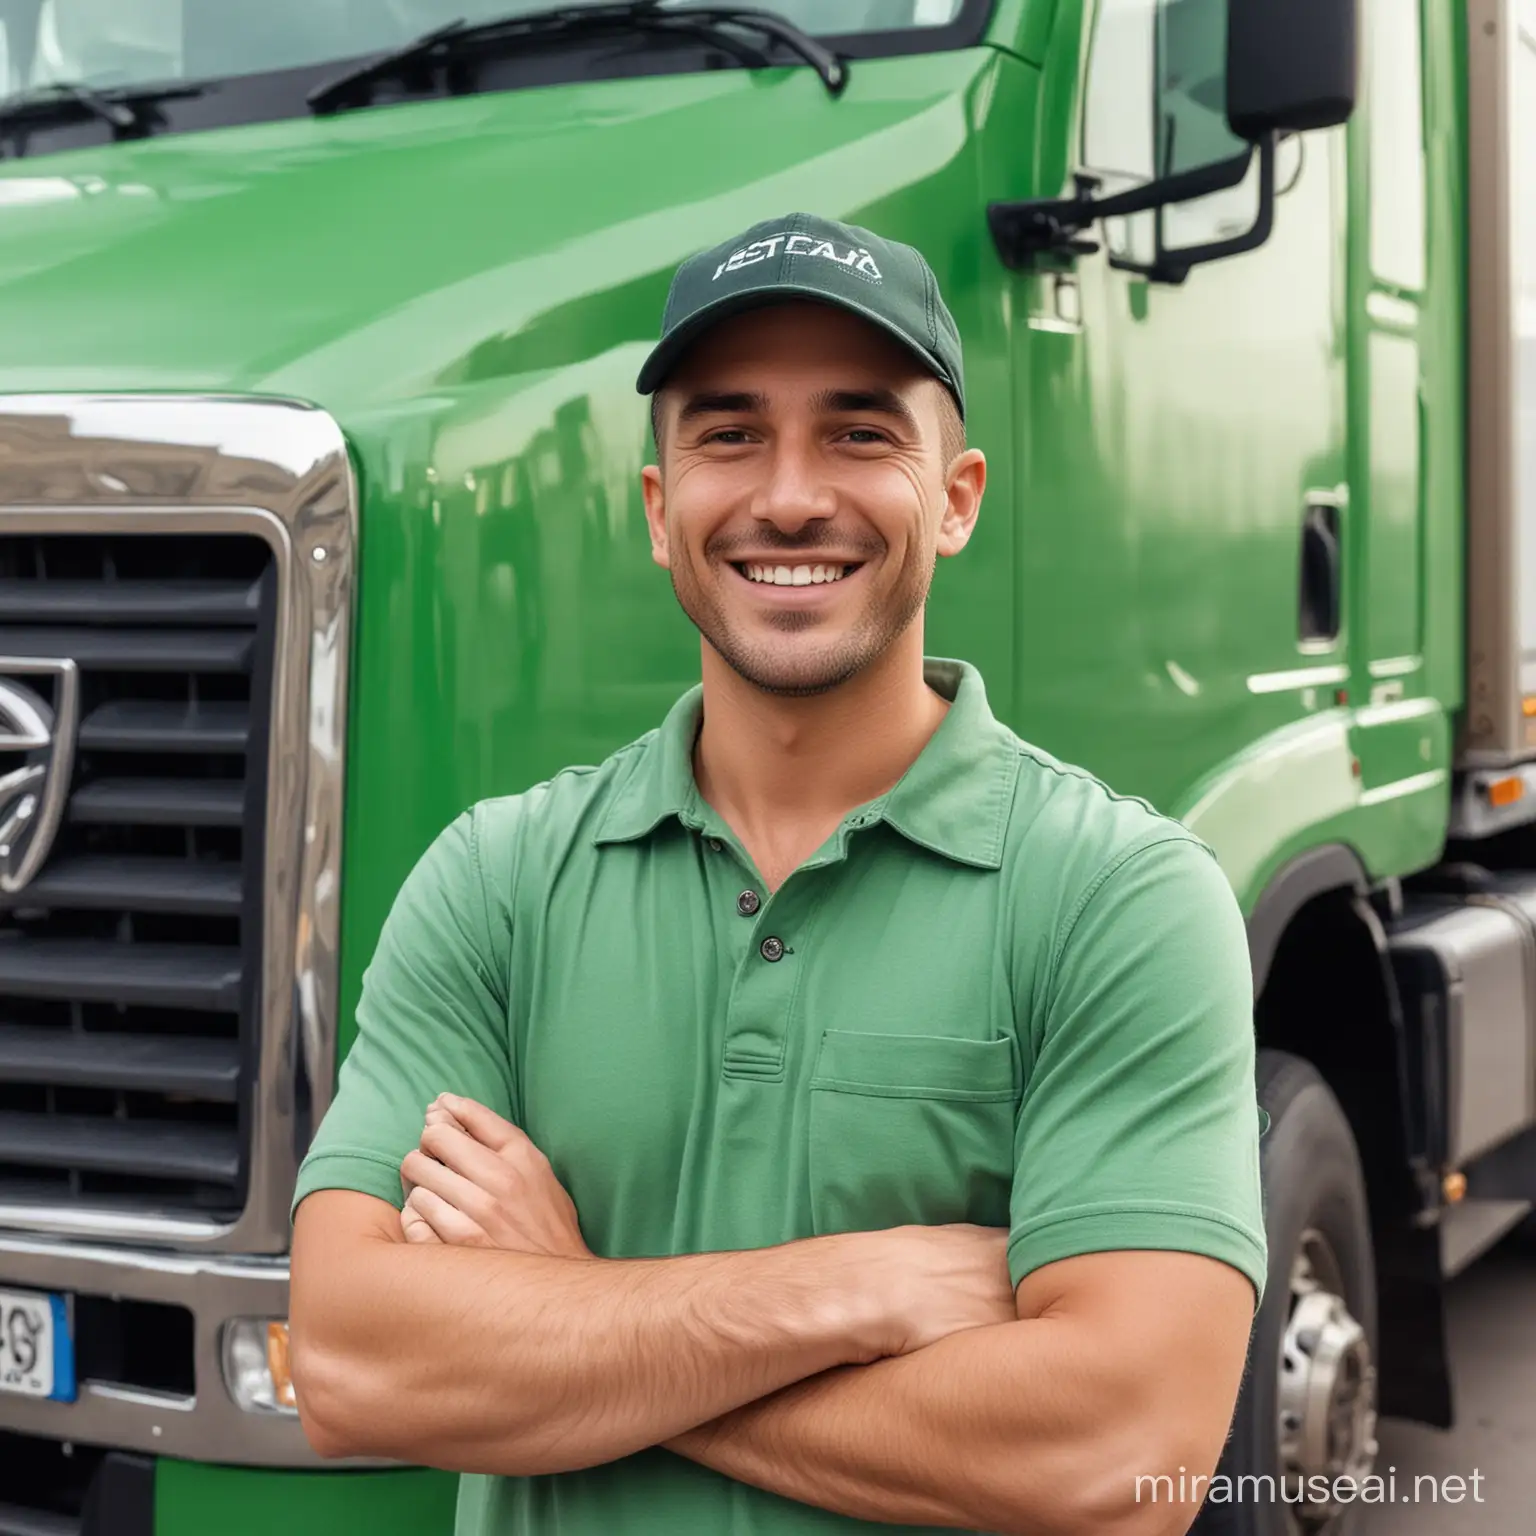 Cheerful Truck Driver in Green Shirt Posing with Truck